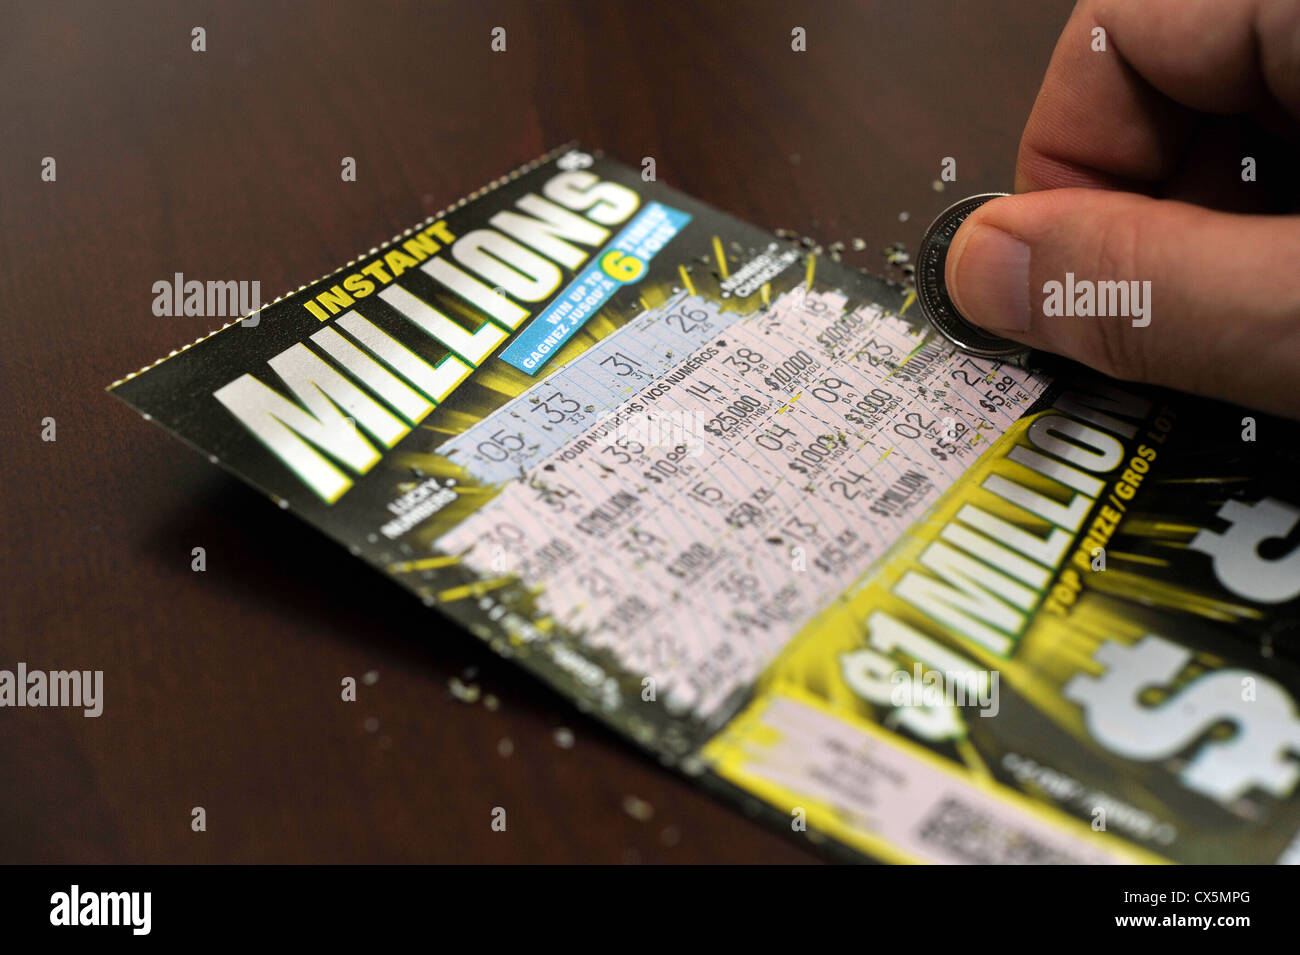 Scratch off lottery ticket Stock Photo